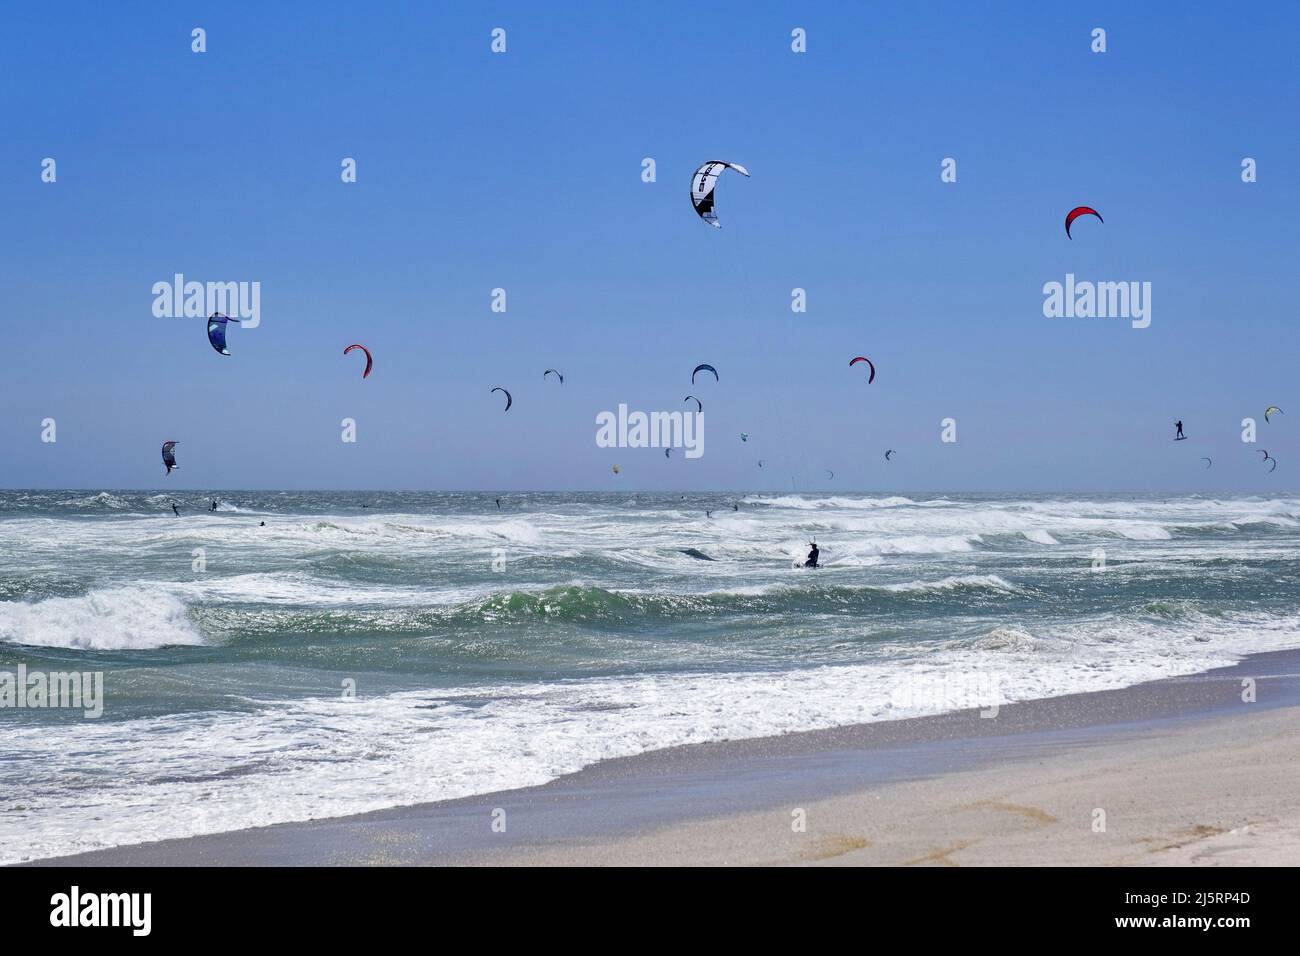 Kitesurfers / kiteboarders at Bloubergstrand along the Atlantic Ocean shores of Table Bay near Cape Town / Kaapstad, Western Cape, South Africa Stock Photo